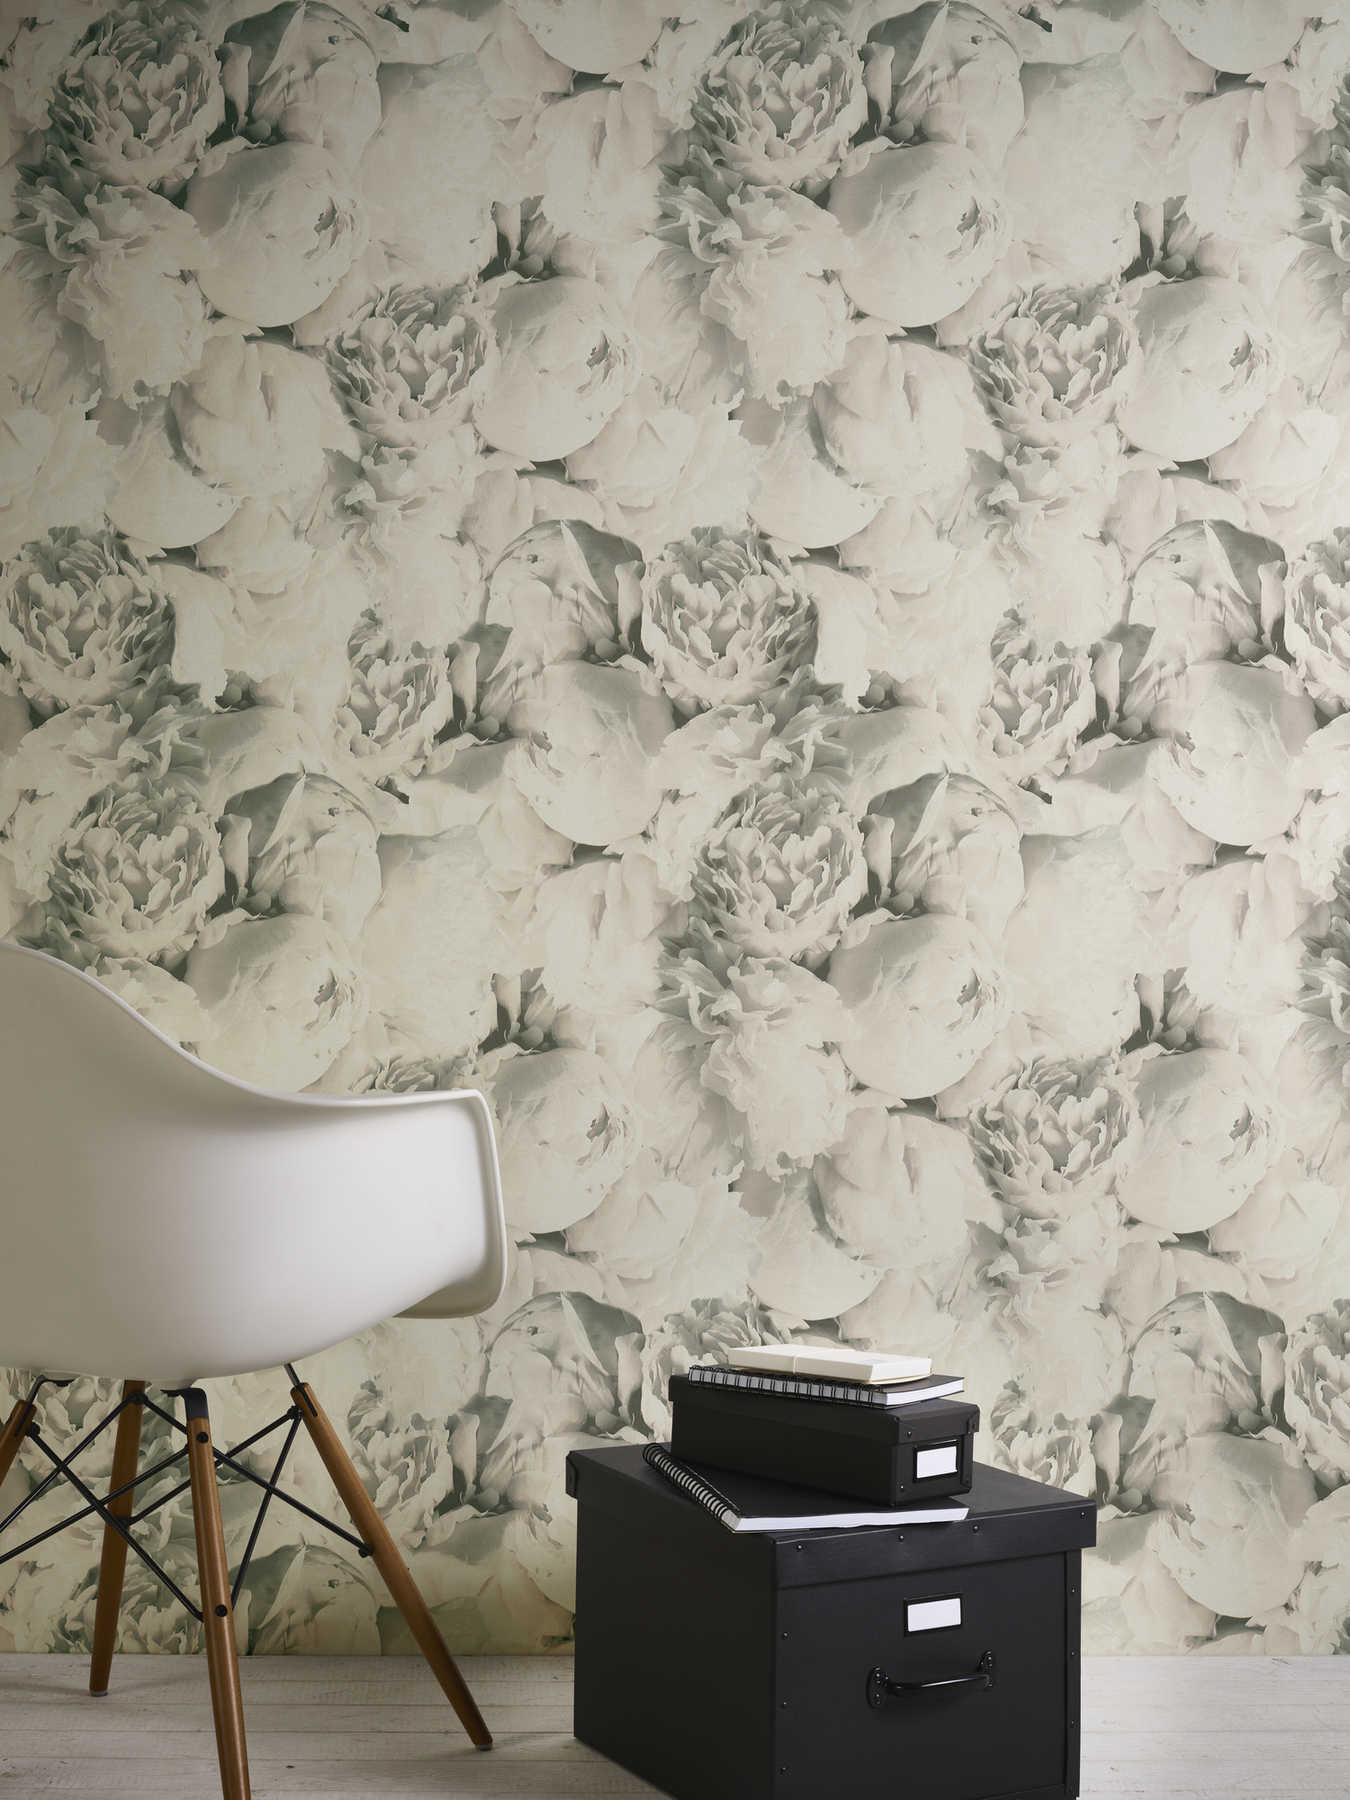             Floral wallpaper roses with shimmer effect - beige, cream, grey
        